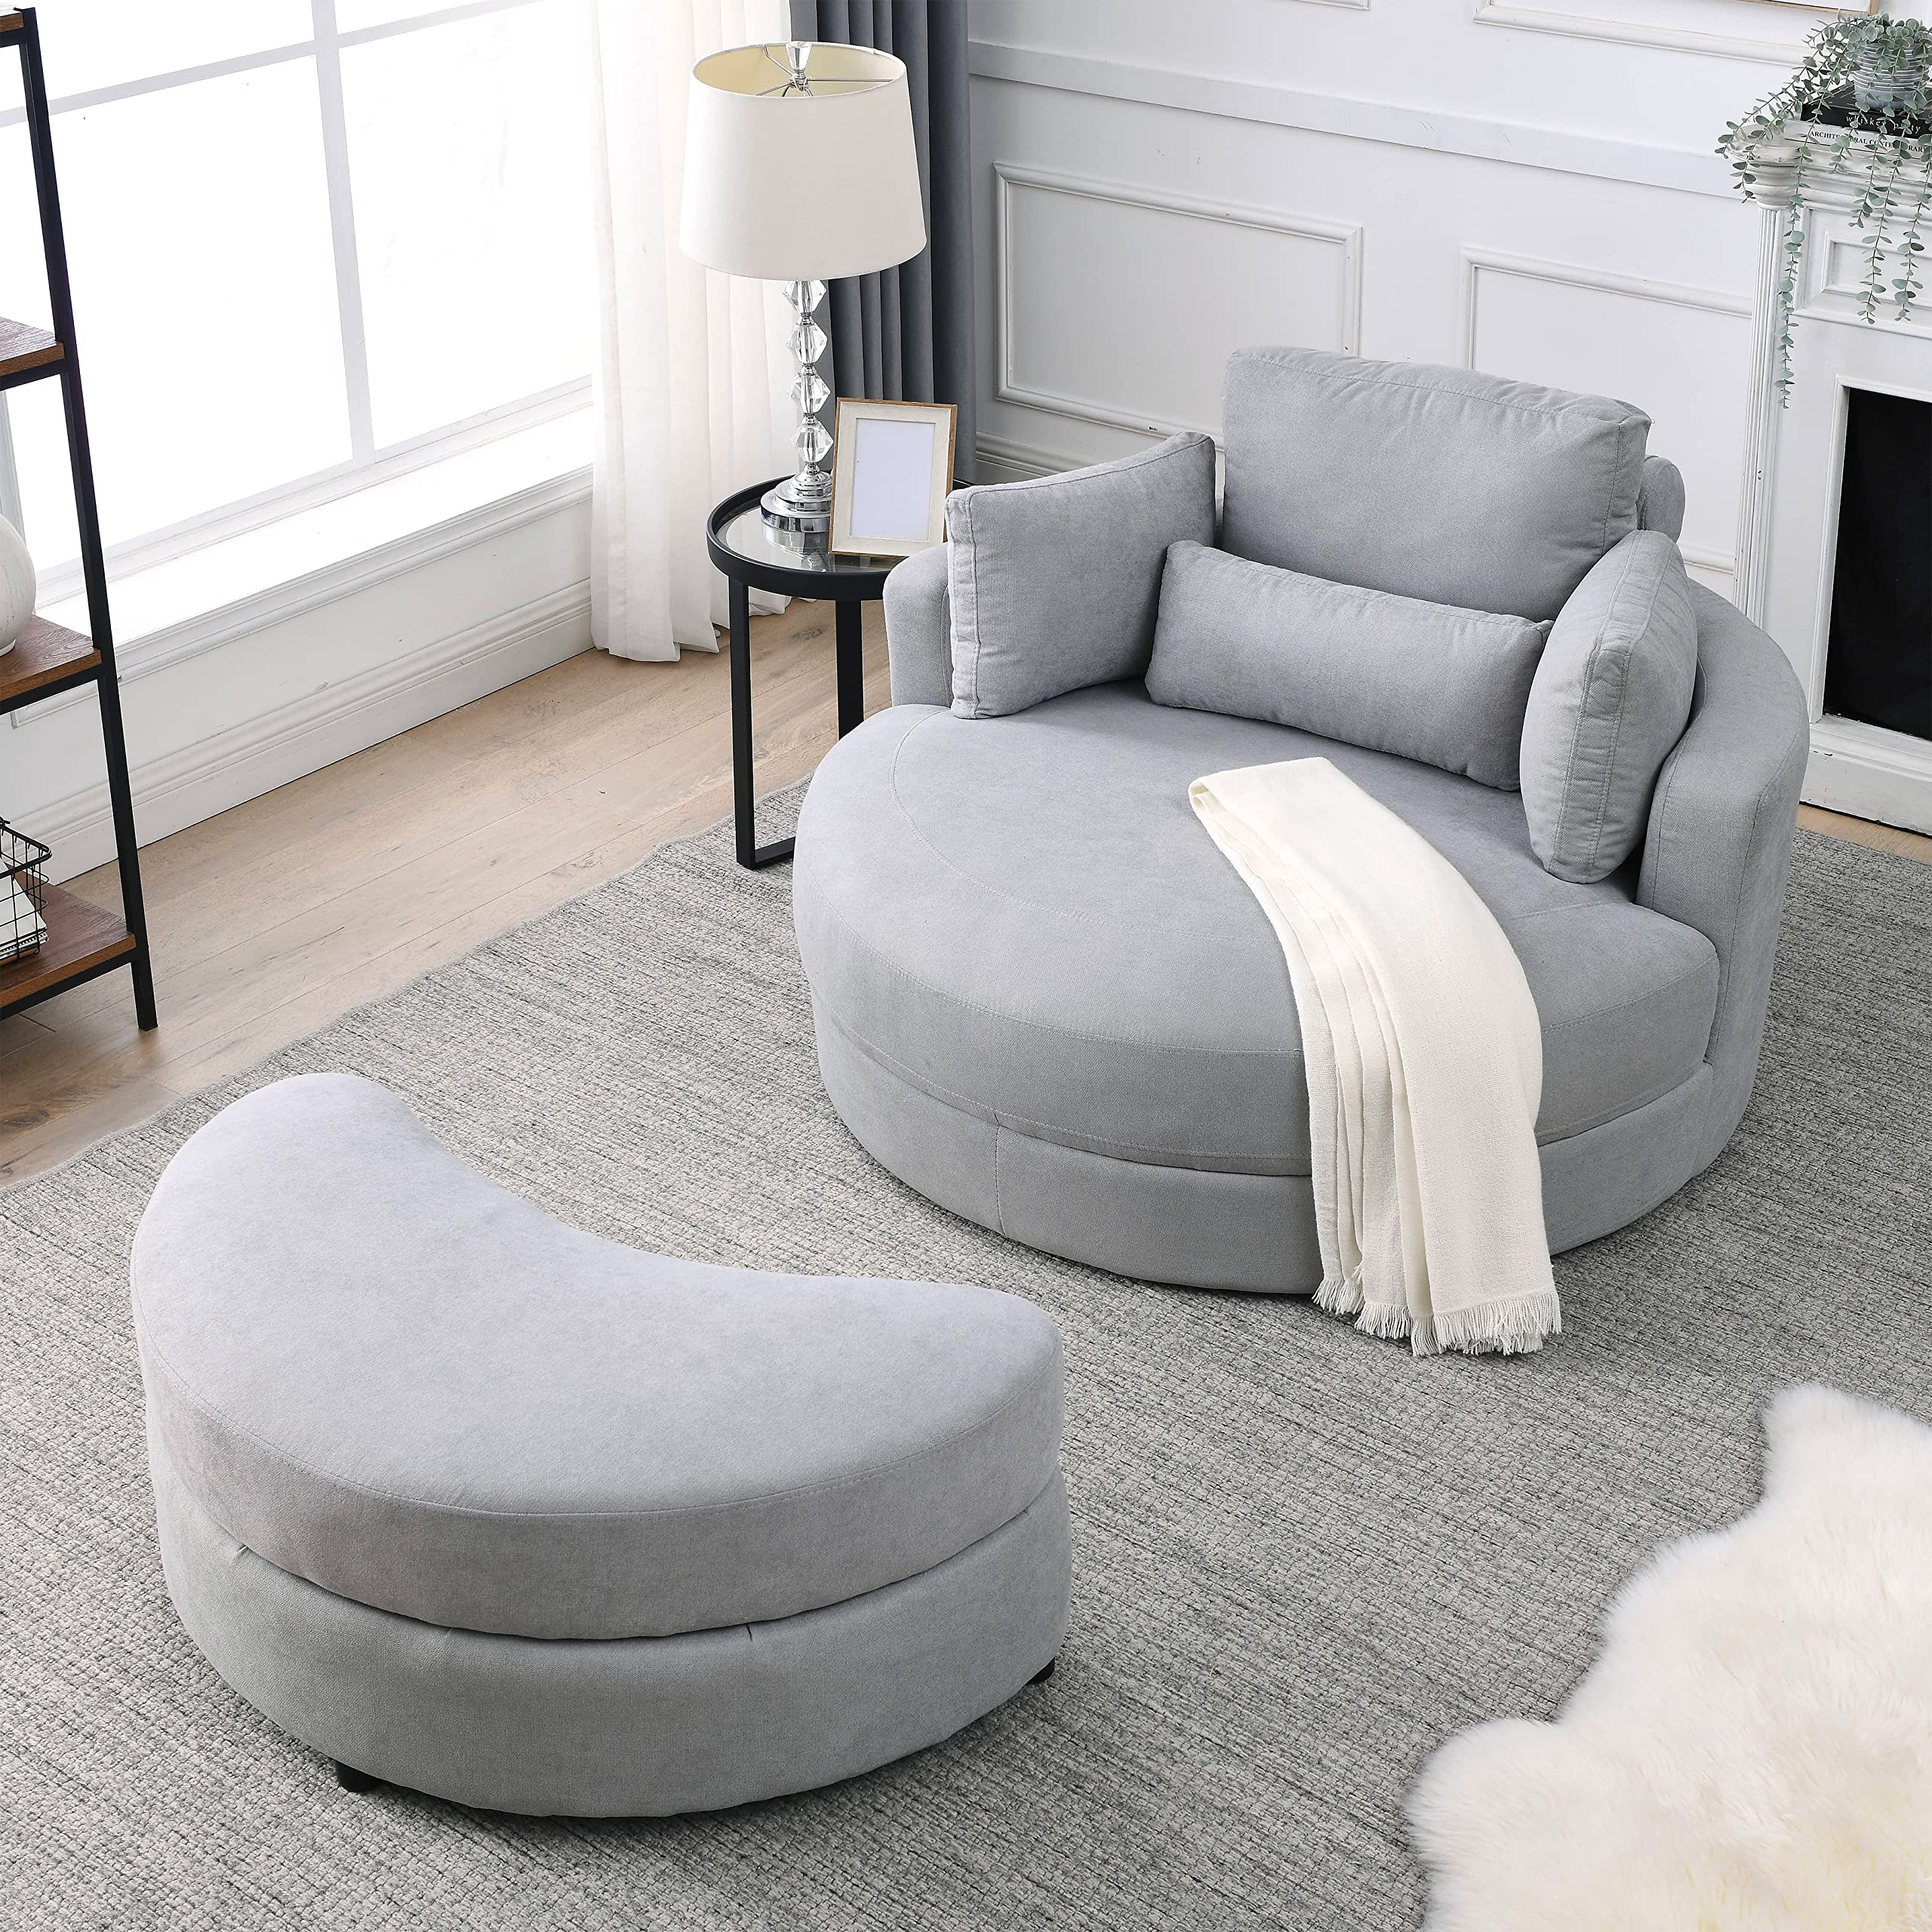 HomSof Swivel Accent Barrel Modern Sofa Lounge Club Big Round Chair with Storage Ottoman Linen Fabric for Living Room Hotel with